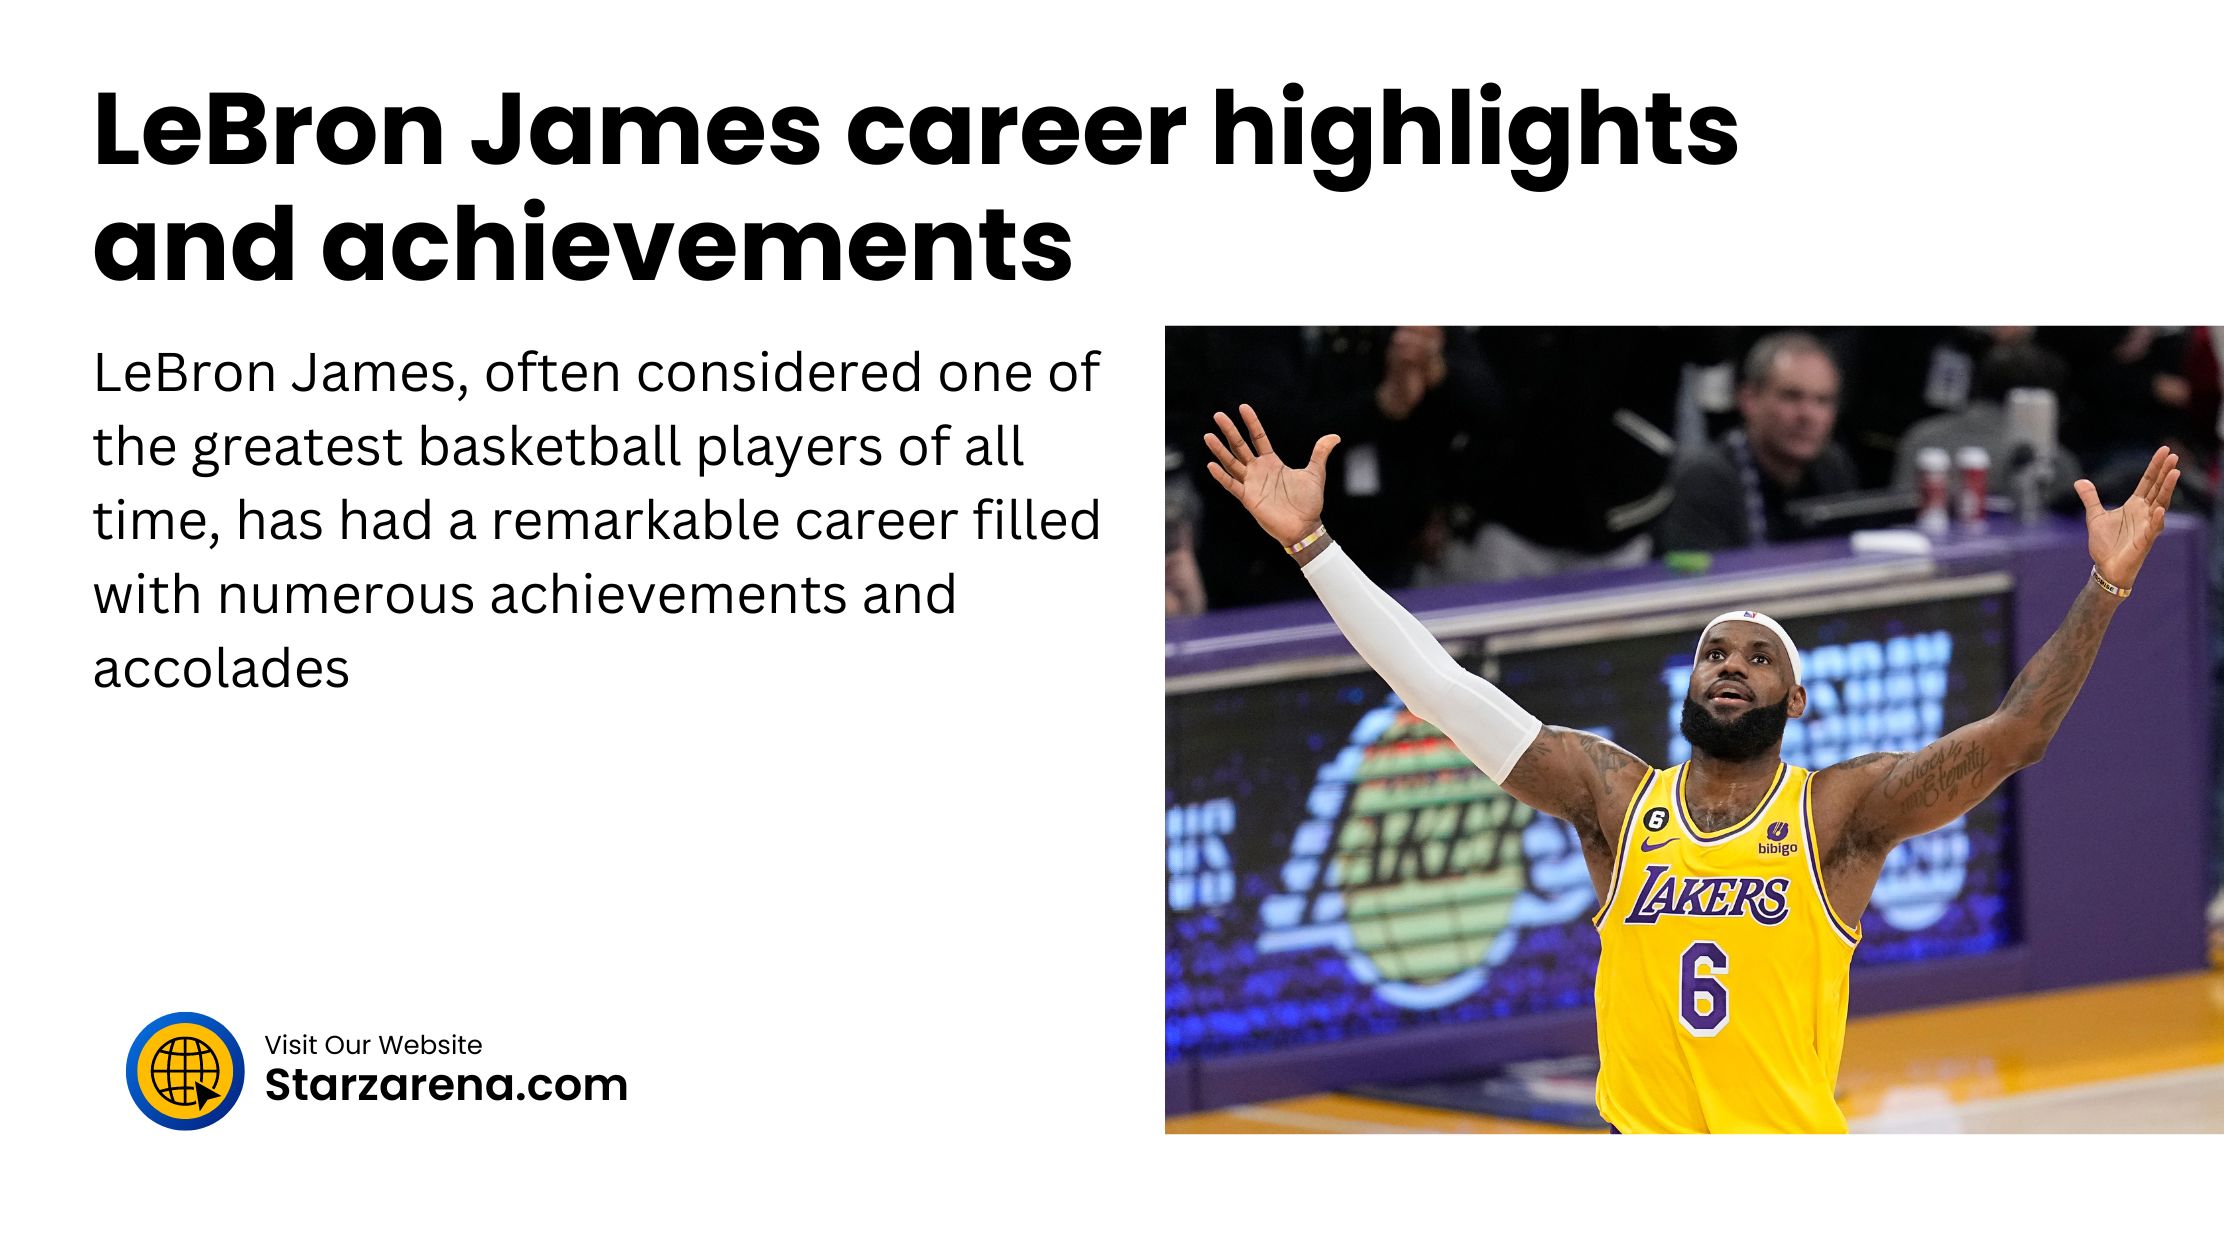 LeBron James career highlights and achievements